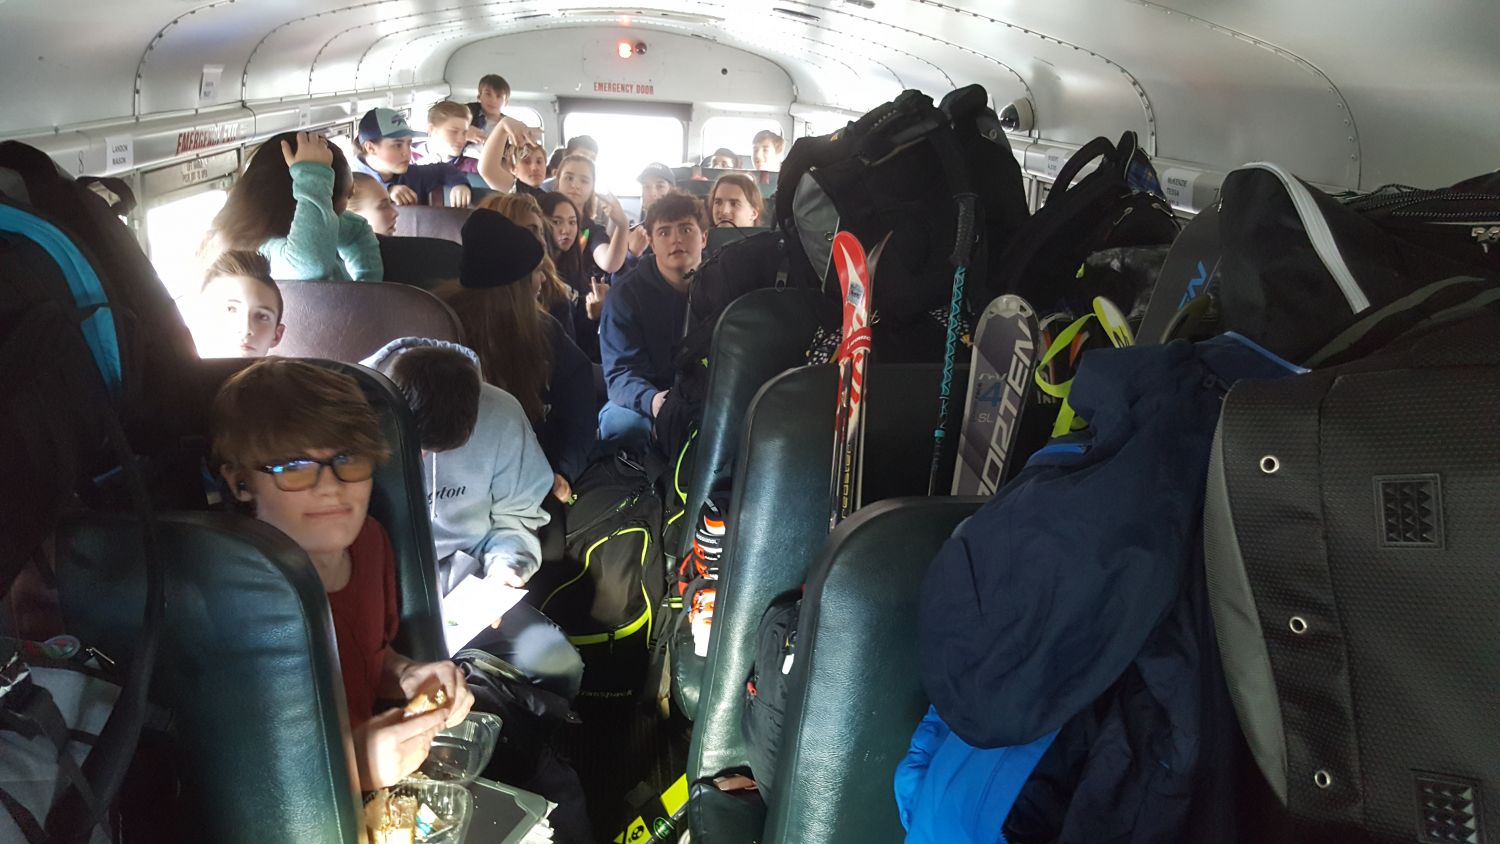 Packed bus ride with Jefferson Ski Team